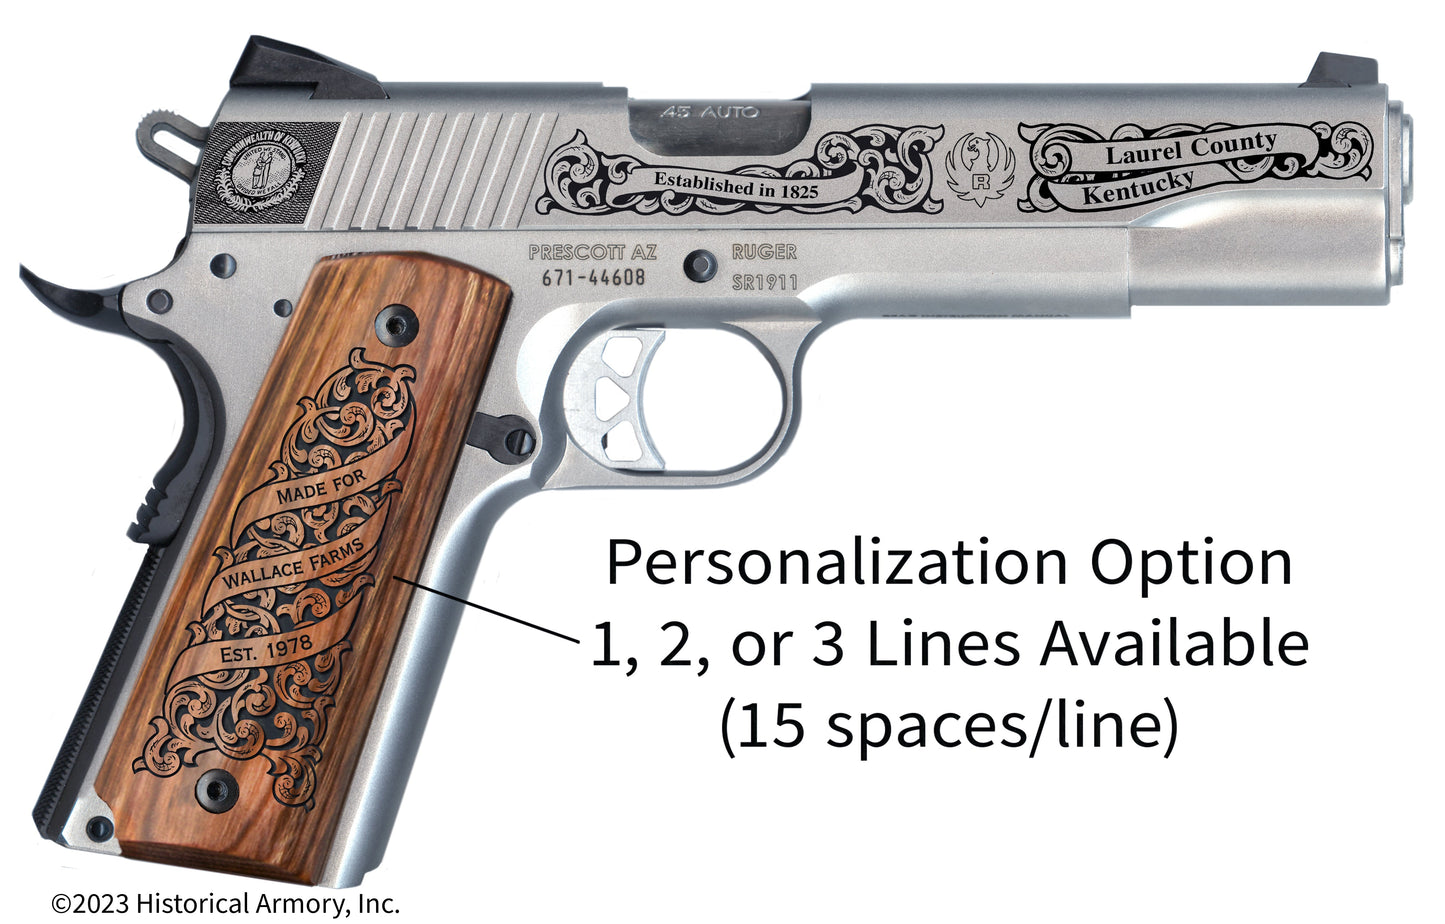 Laurel County Kentucky Personalized Engraved .45 Auto Ruger 1911